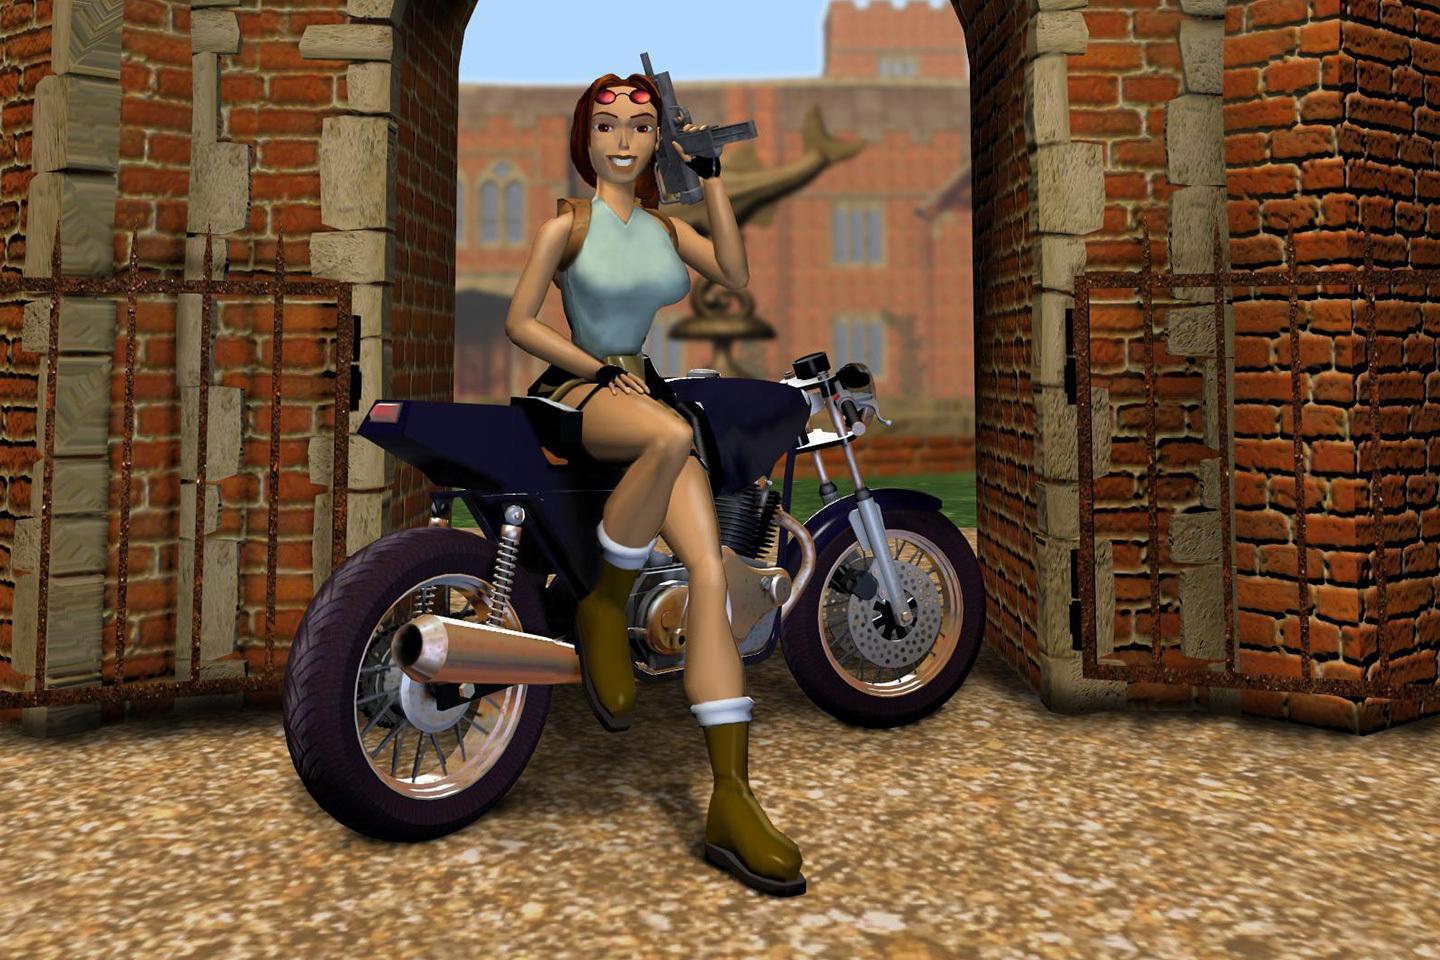 Lara in adventure gear poses on a motorcycle in front of a brick archway, displaying early 3D video game graphics.